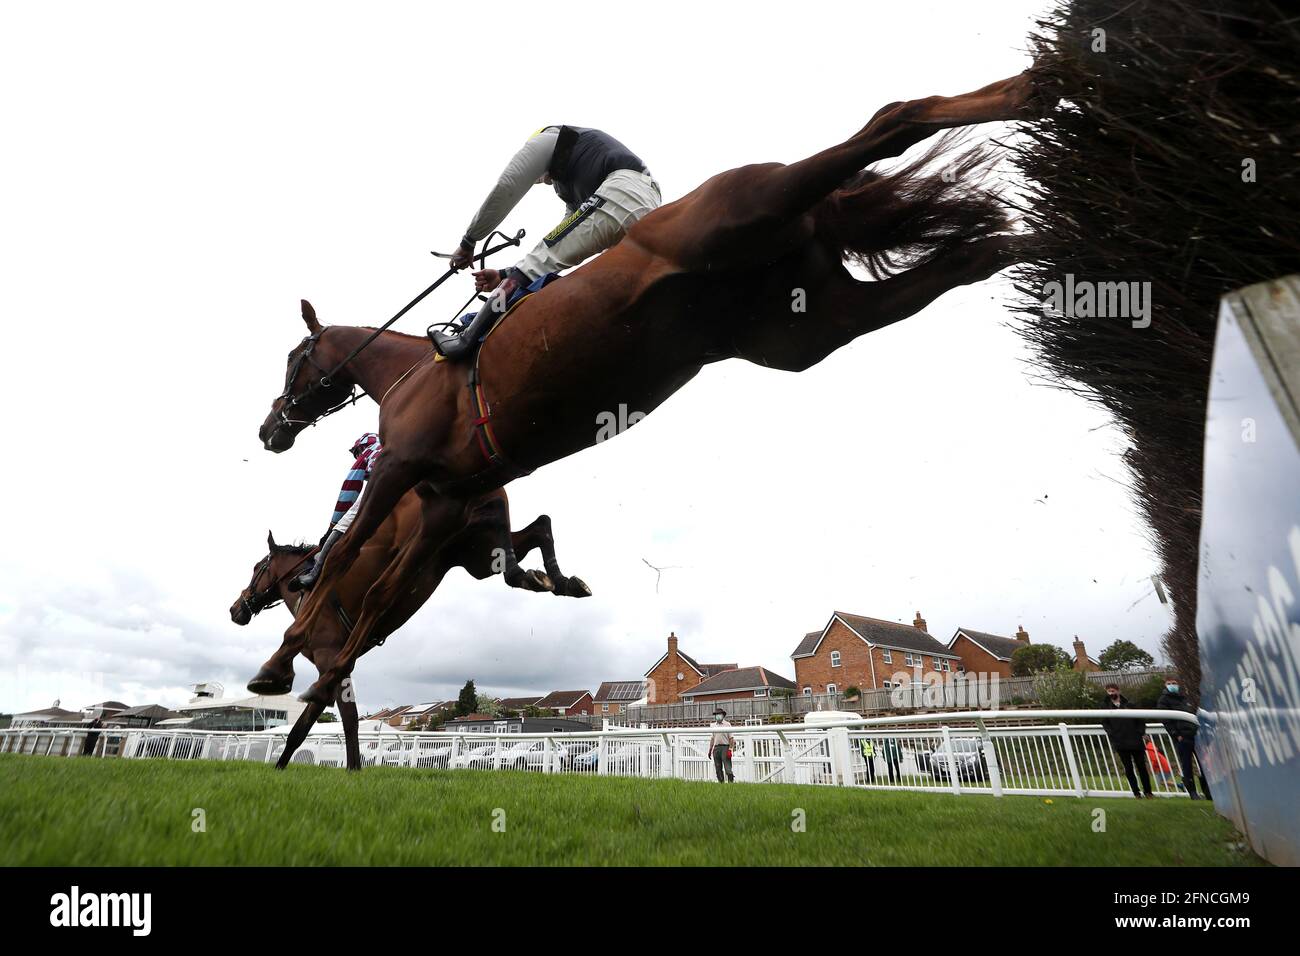 Atlantic Storm ridden by jockey Charlie Hammond (left) on their way to winning the Visit racingtv.com Handicap Chase with Larch Hill ridden by jockey Sam Twiston-Davies second at Stratford-on-Avon Racecourse. Picture date: Sunday May 16, 2021. Stock Photo